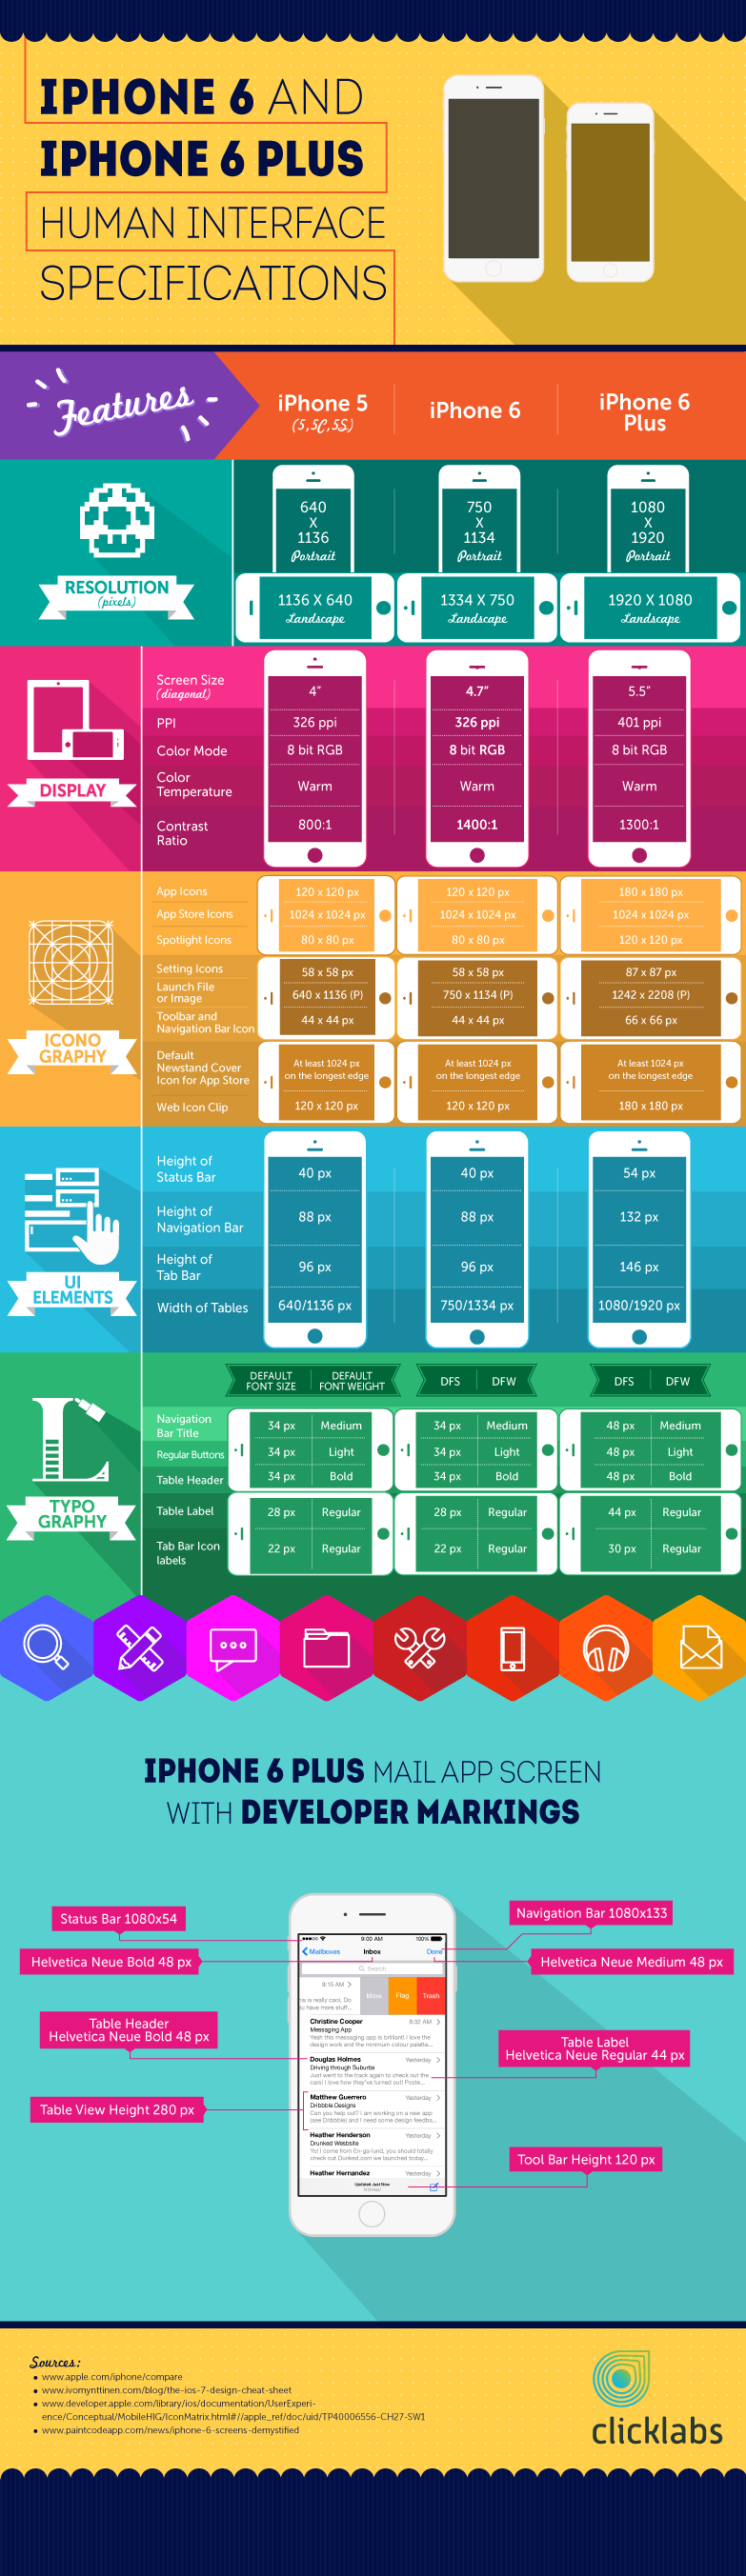 iPhone 6 Template Cheat Sheet [Infographic] Click Labs